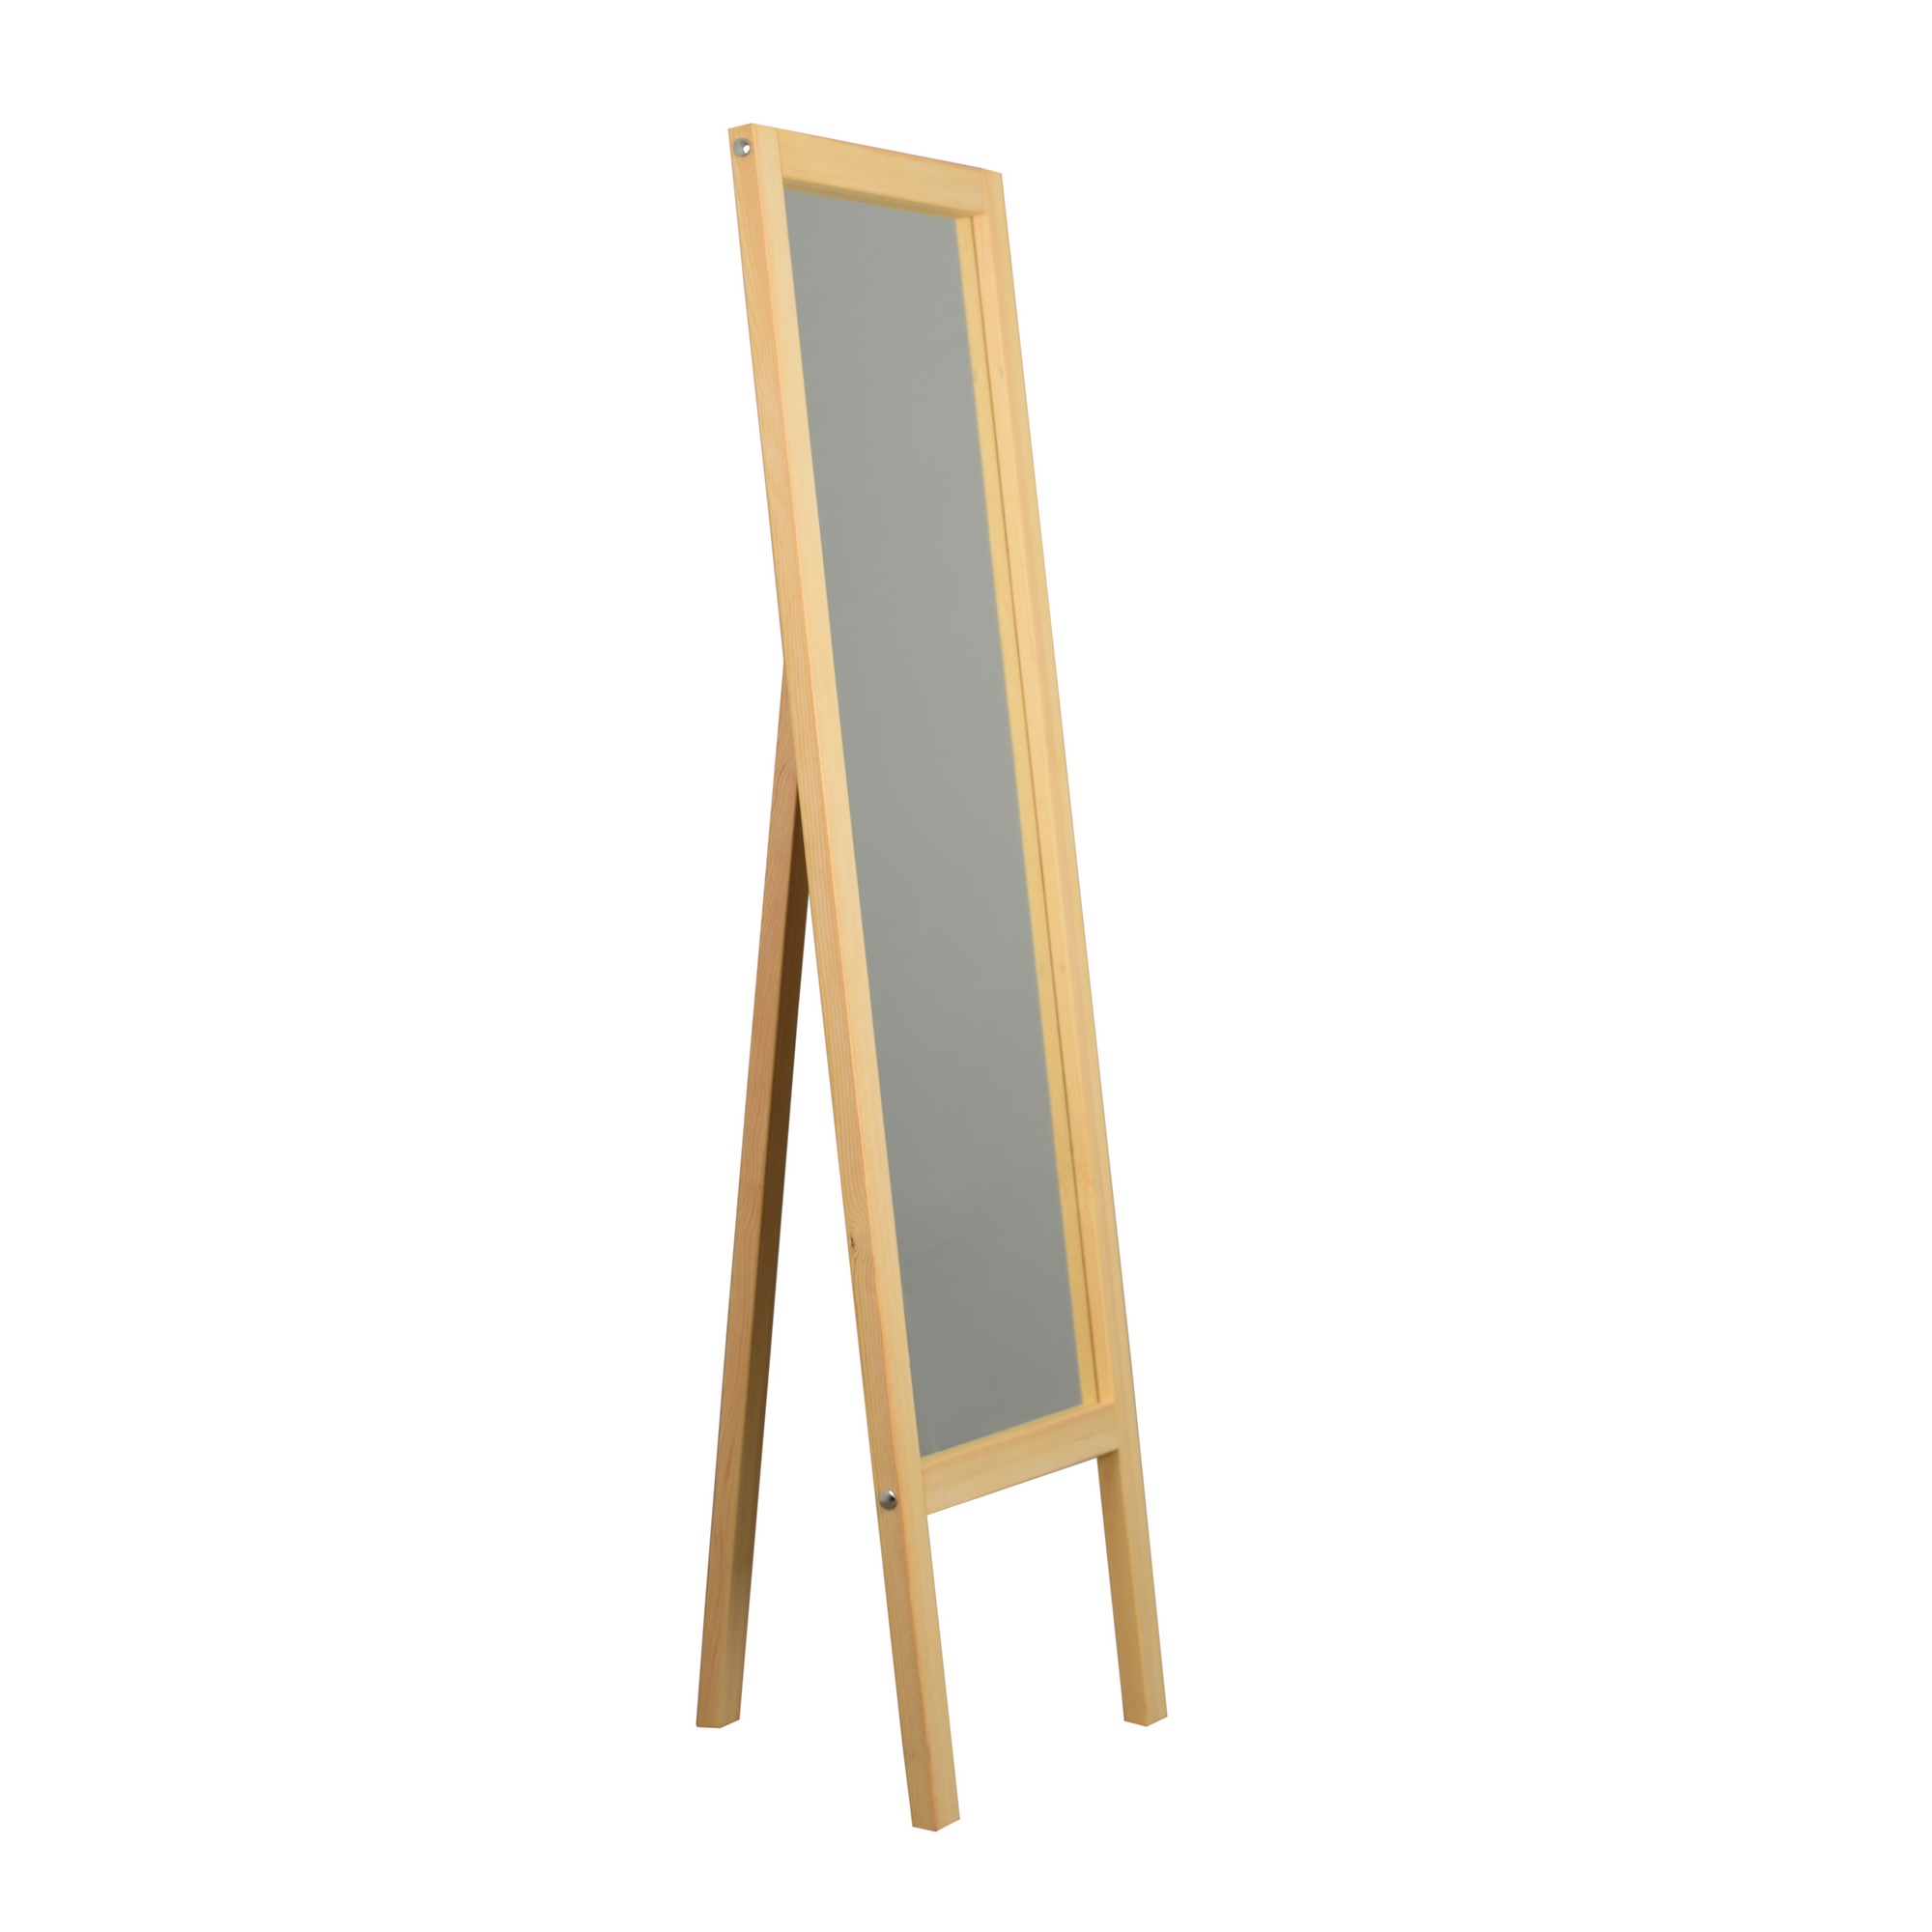 A41 Natural Wood Standing Mirror